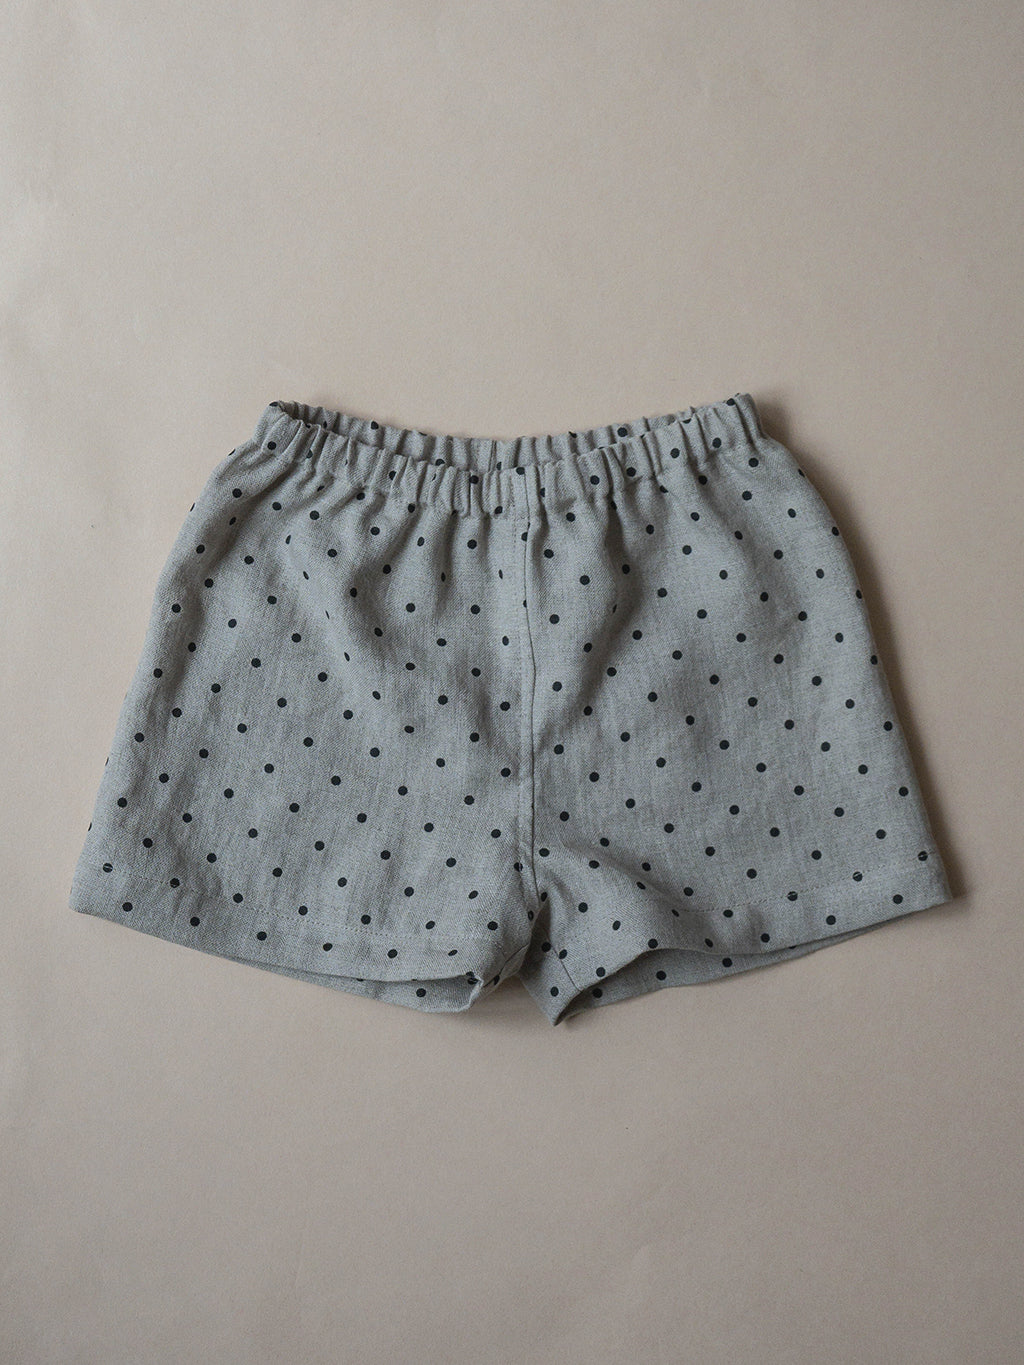 LUCI - slow fashion for women and children.